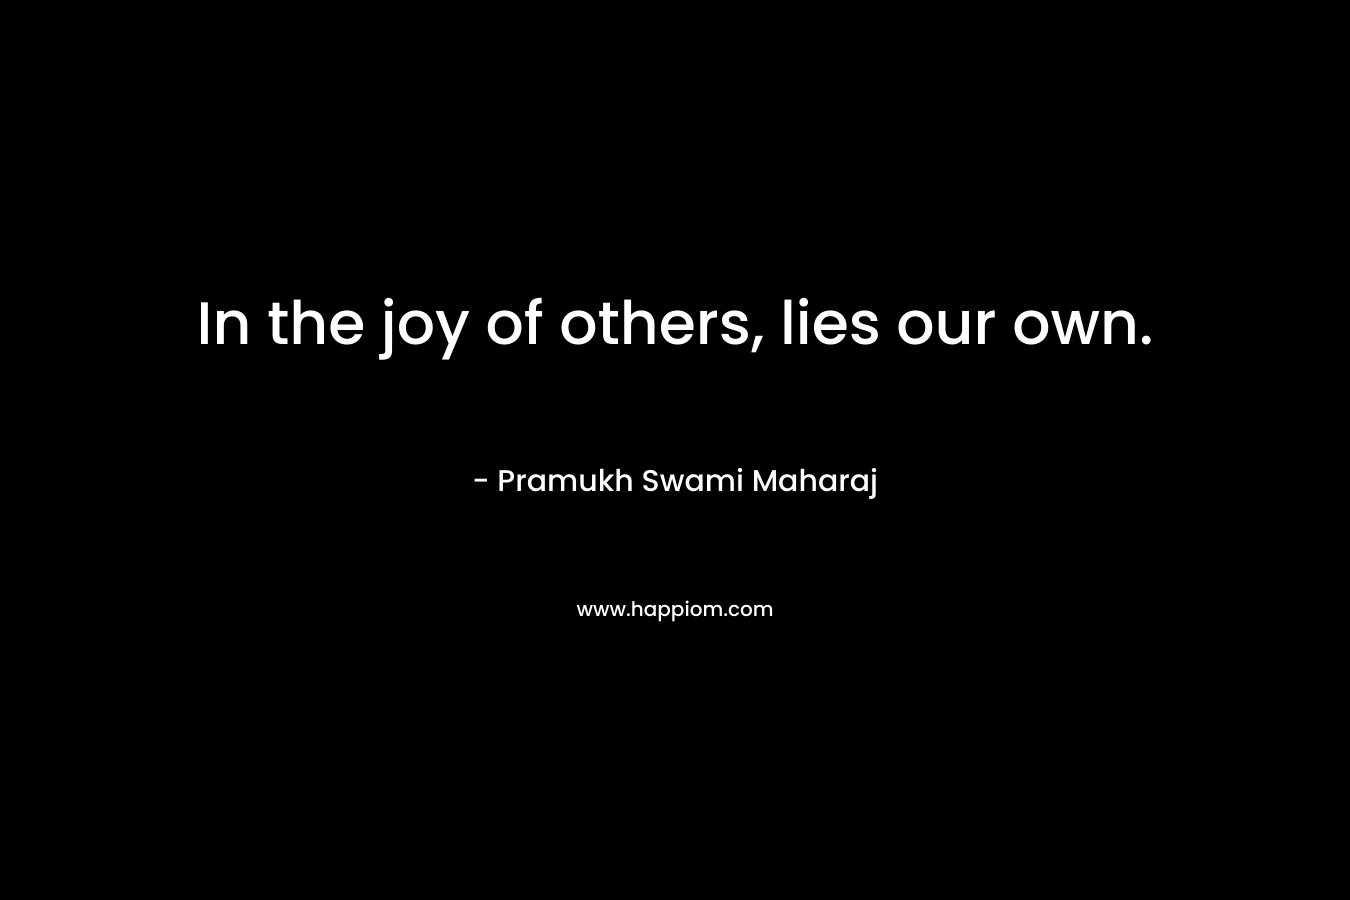 In the joy of others, lies our own. – Pramukh Swami Maharaj